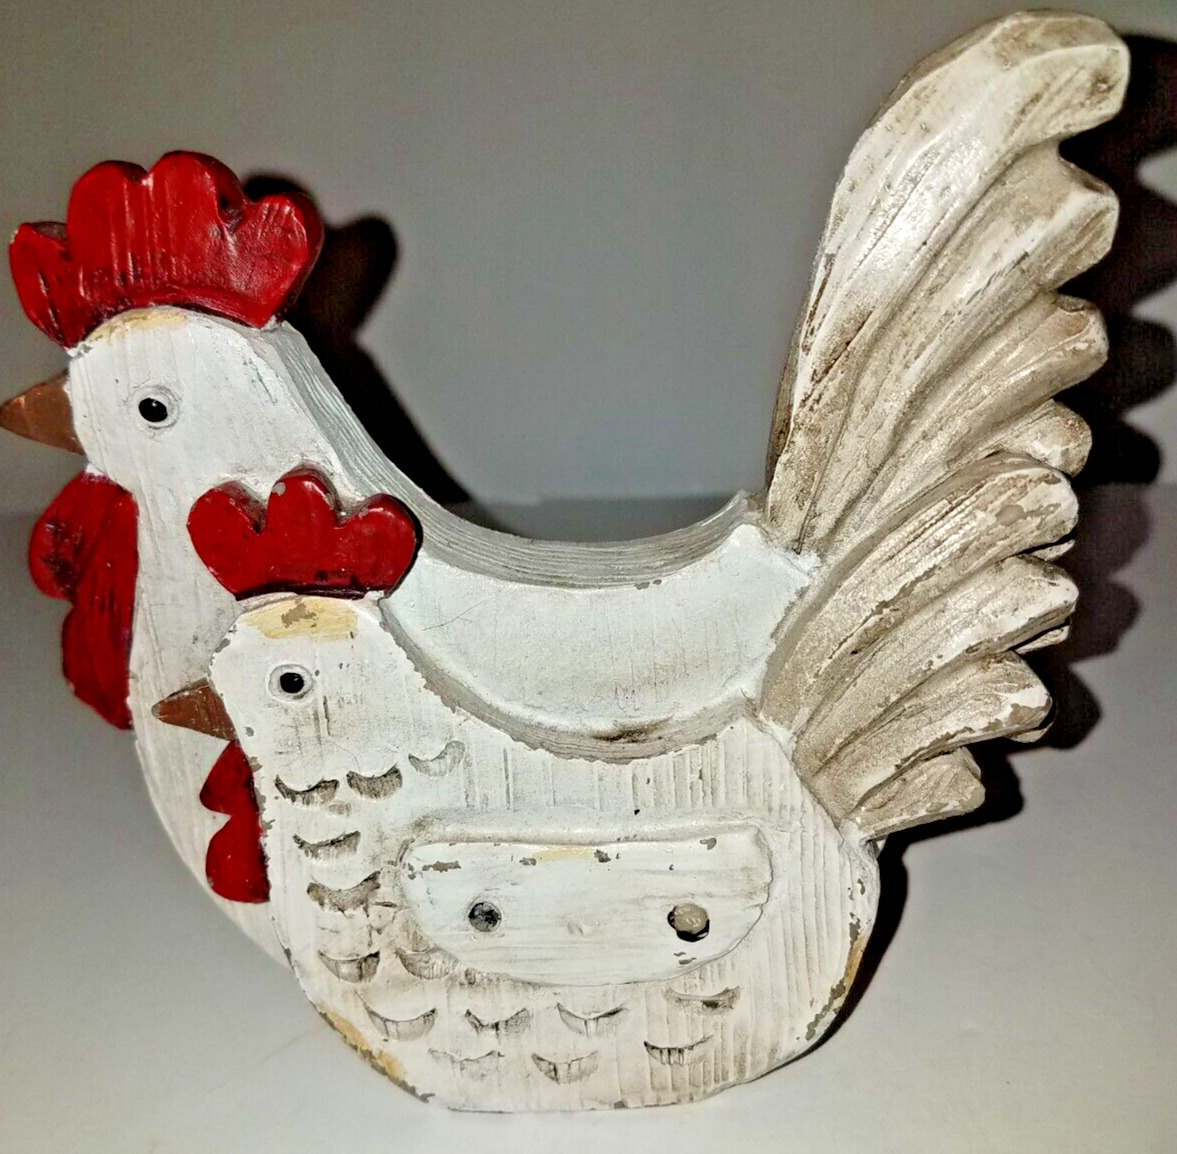 Small Rooster & Chicken Figurine Country Farm House Folk Art Decor Wood-Look